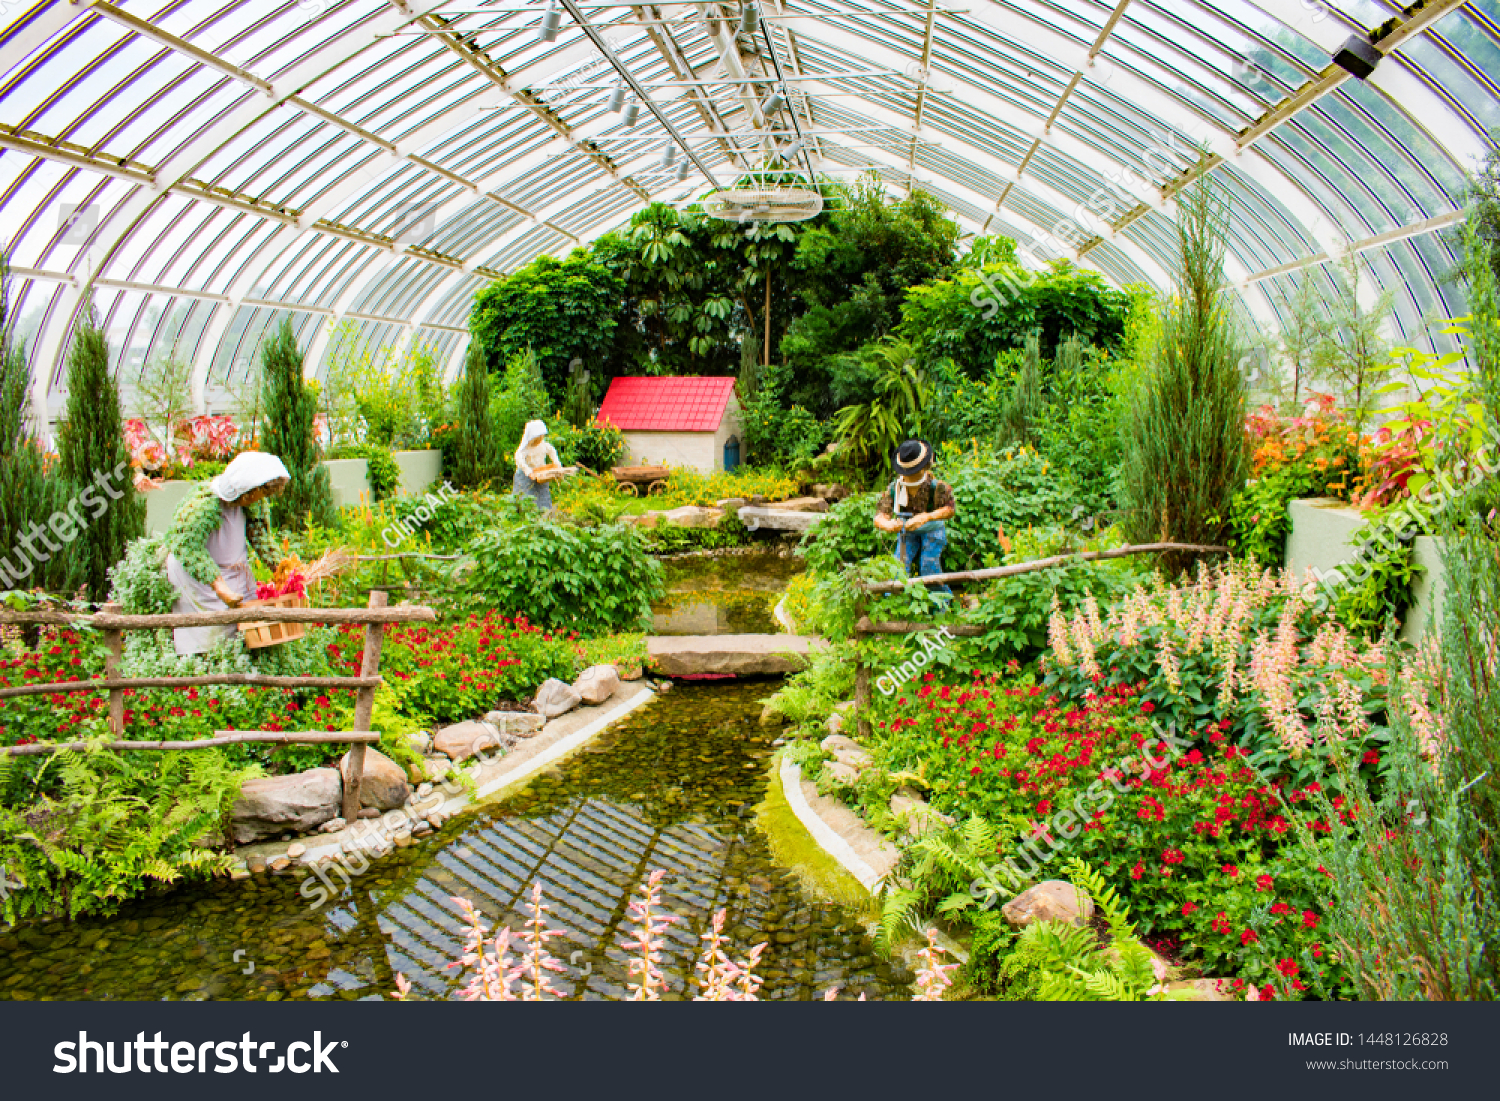 Phipps Conservatory Botanical Gardens Images Stock Photos